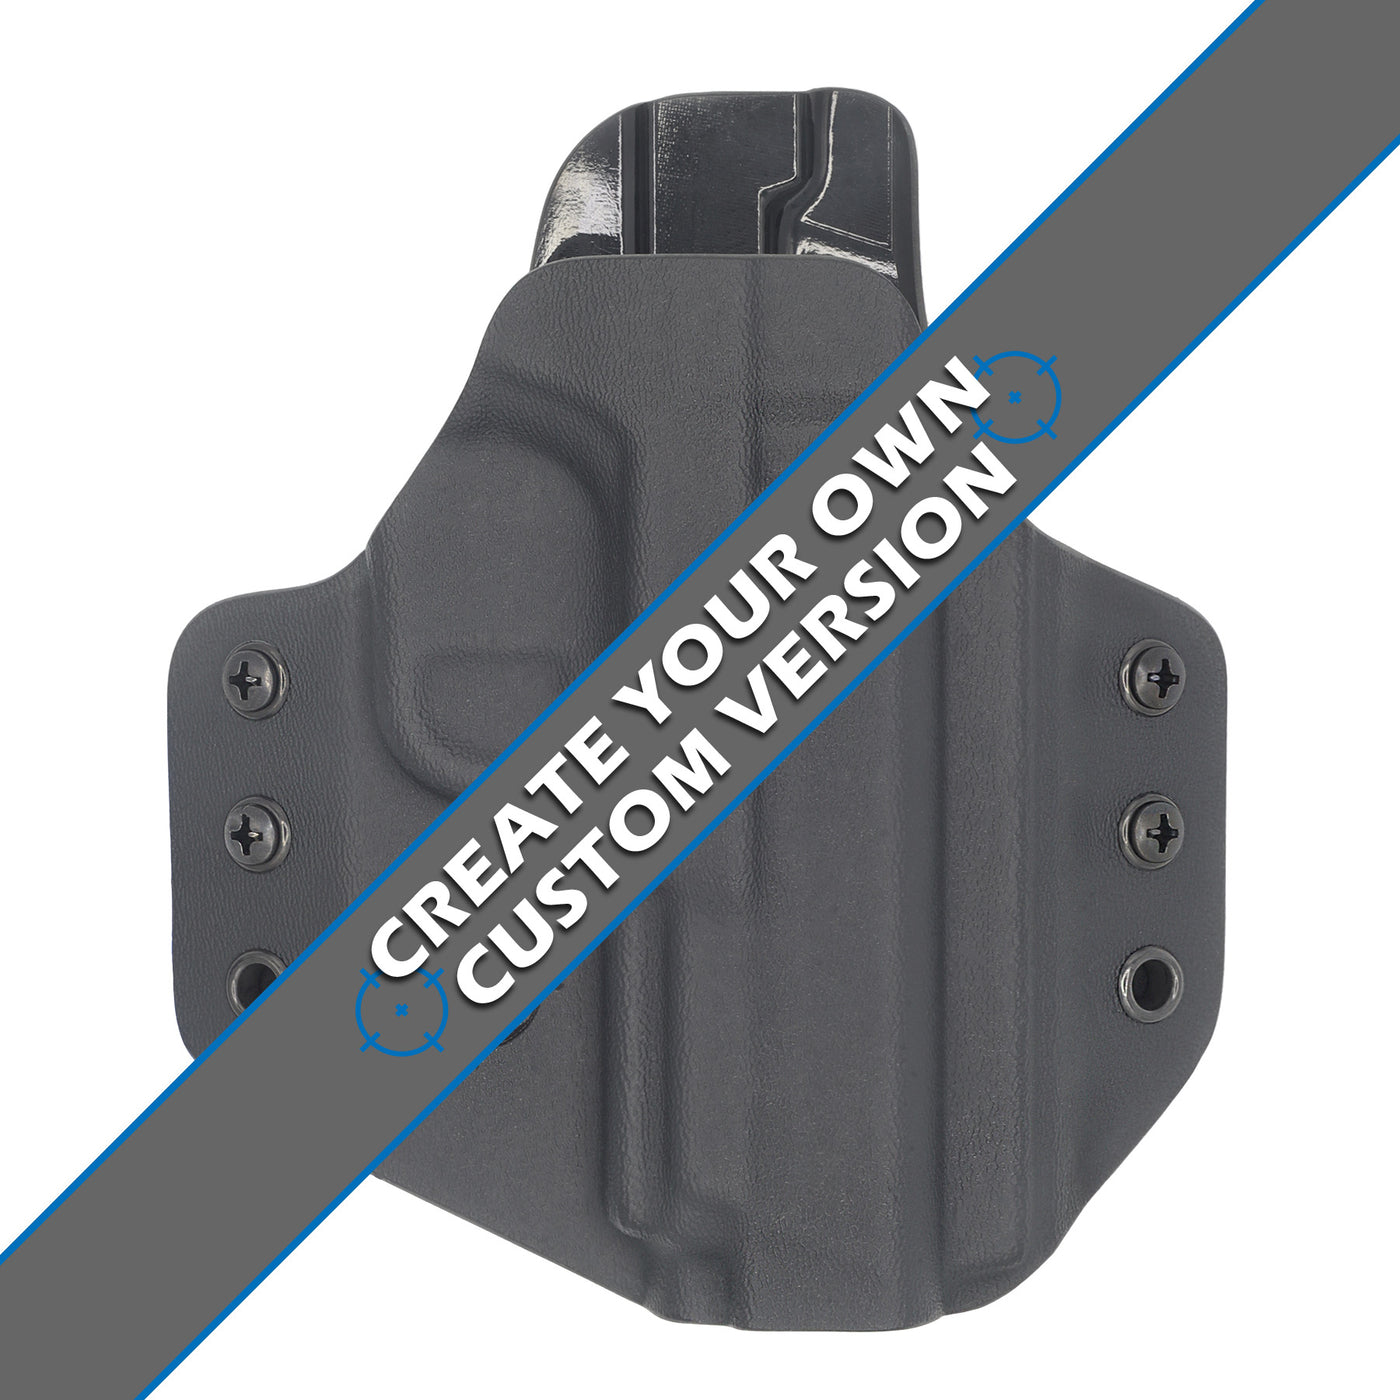 This is a C&G Holsters Covert series Outside the Waistband Smith & Wesson M&P Shield 9EZ without the firearm showing a front view.